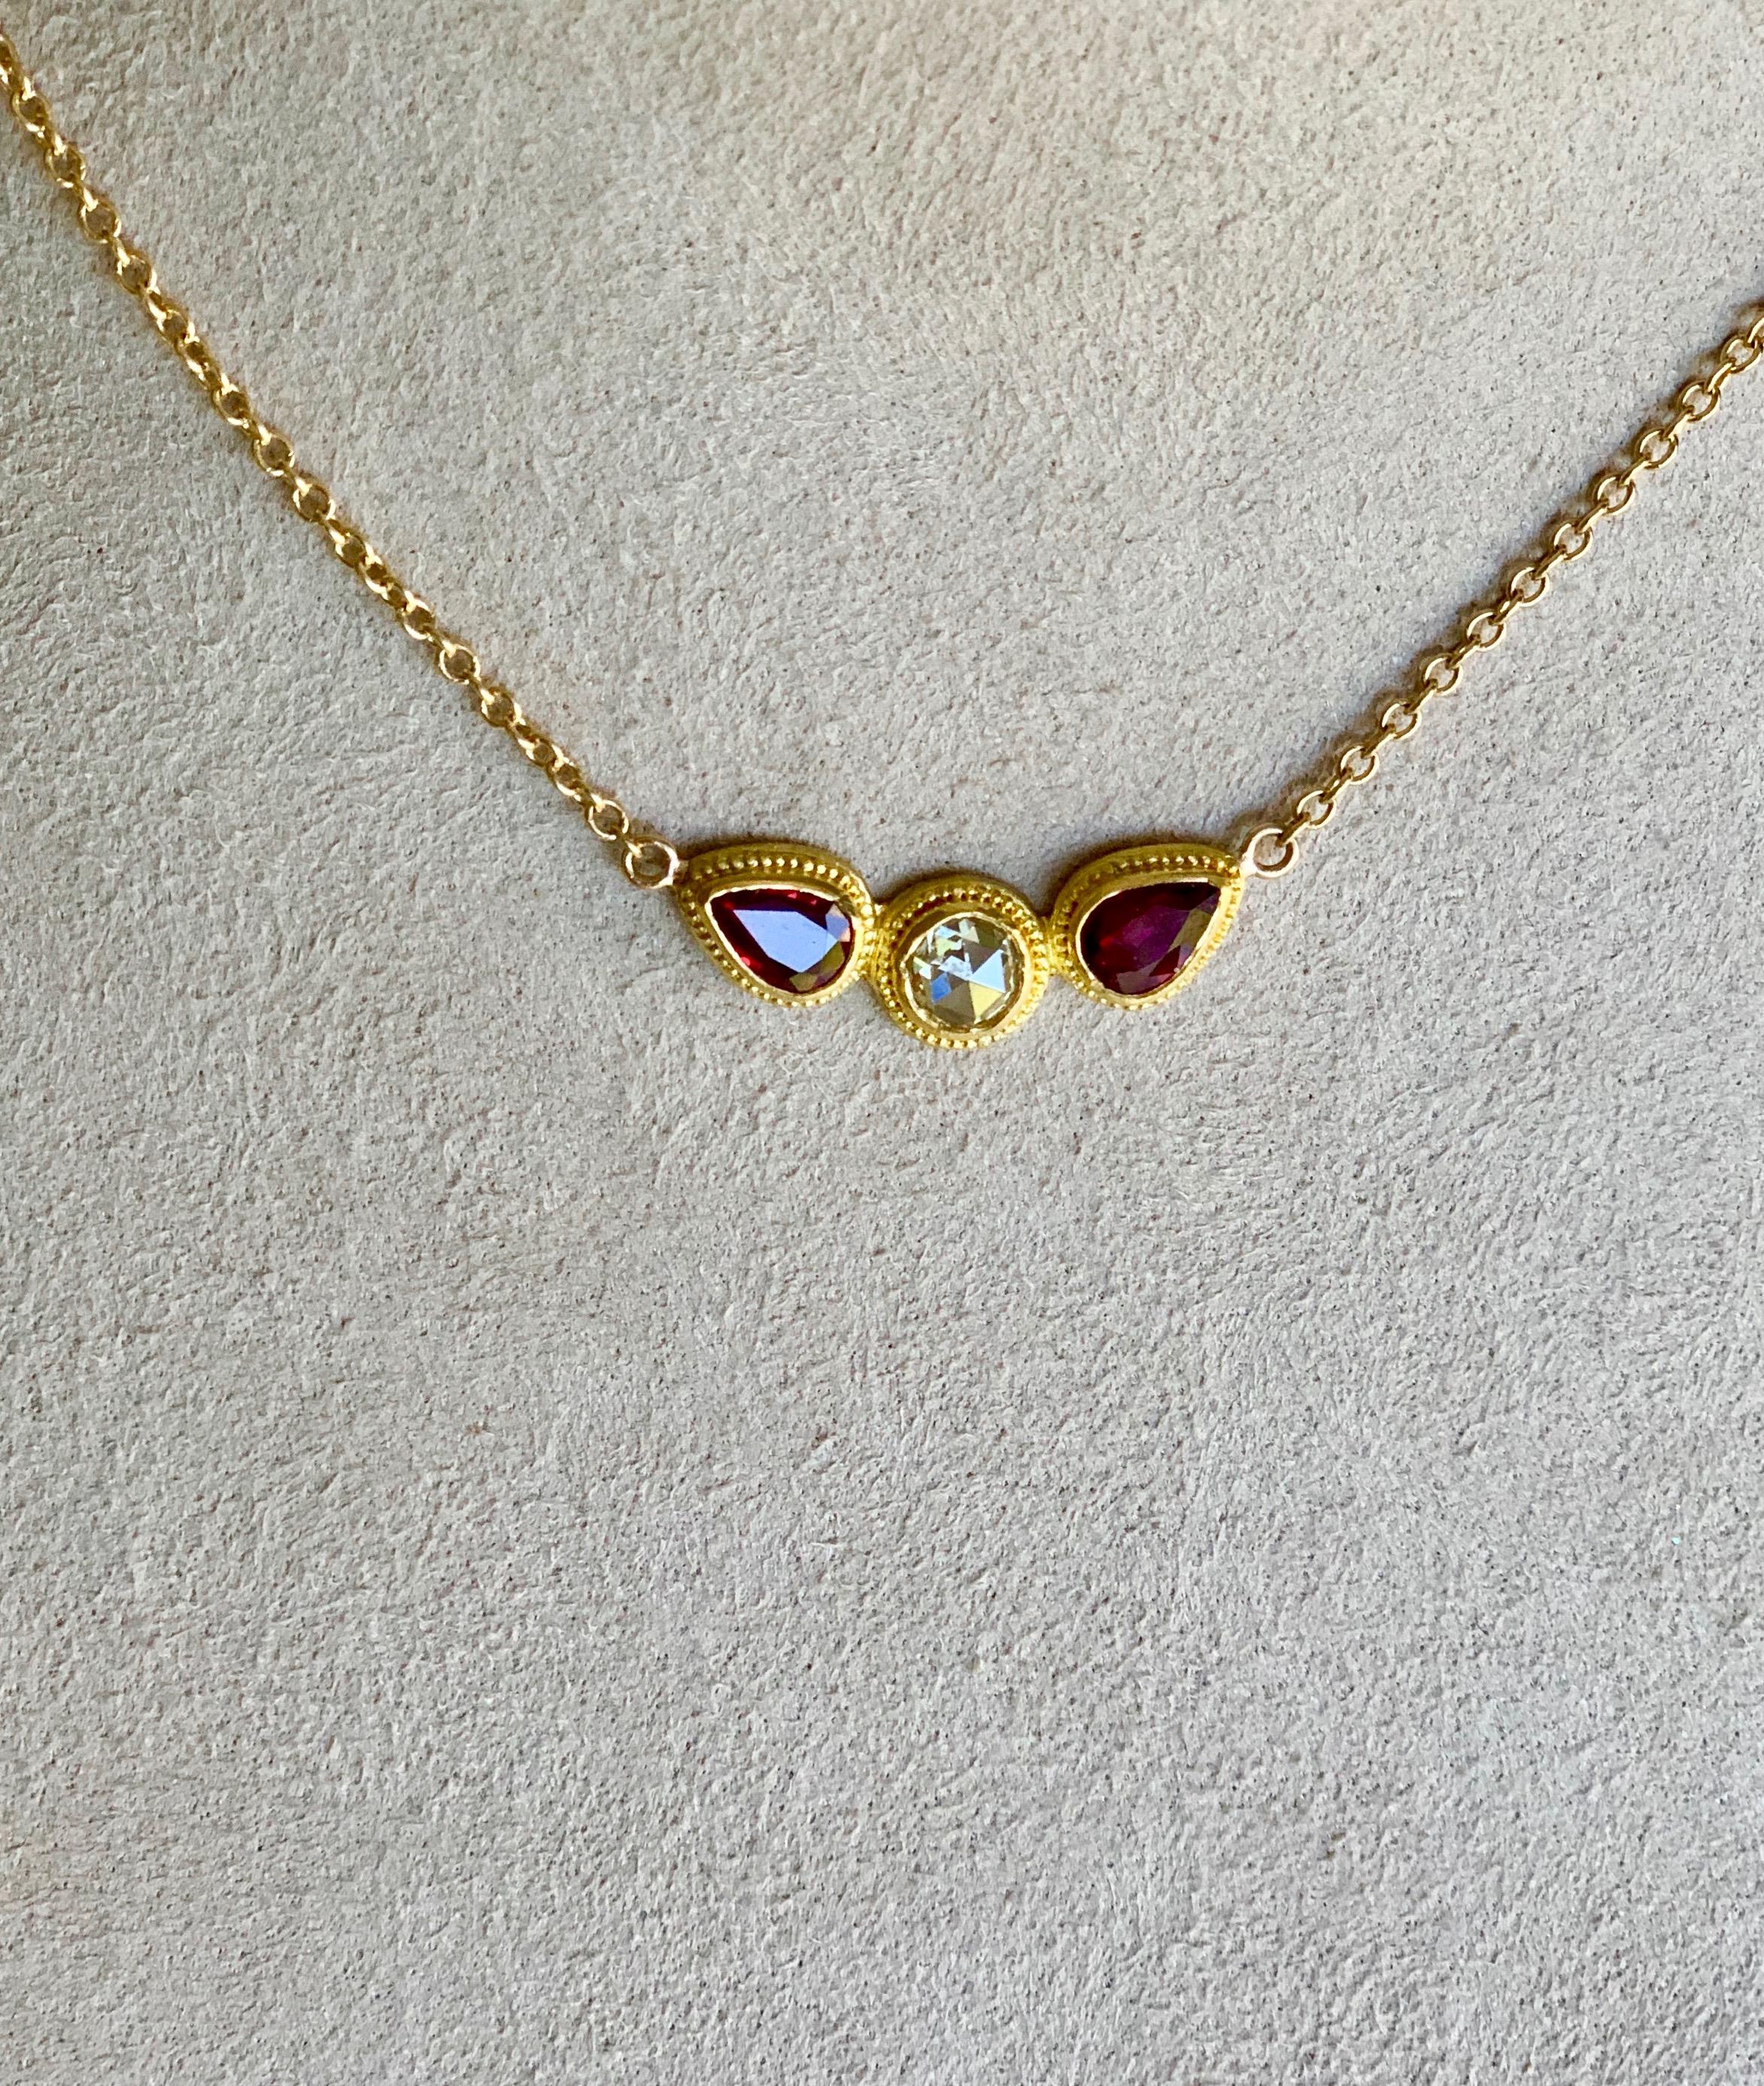 This winged pendant necklace with rose cut Diamond and pear shape Rubies, is set in 22 Karat gold with granulation.
The delicate chain is 18Karat yellow gold with a lobster claw closure allowing to shorten the chain by 1 inch if desired.
Diamond is